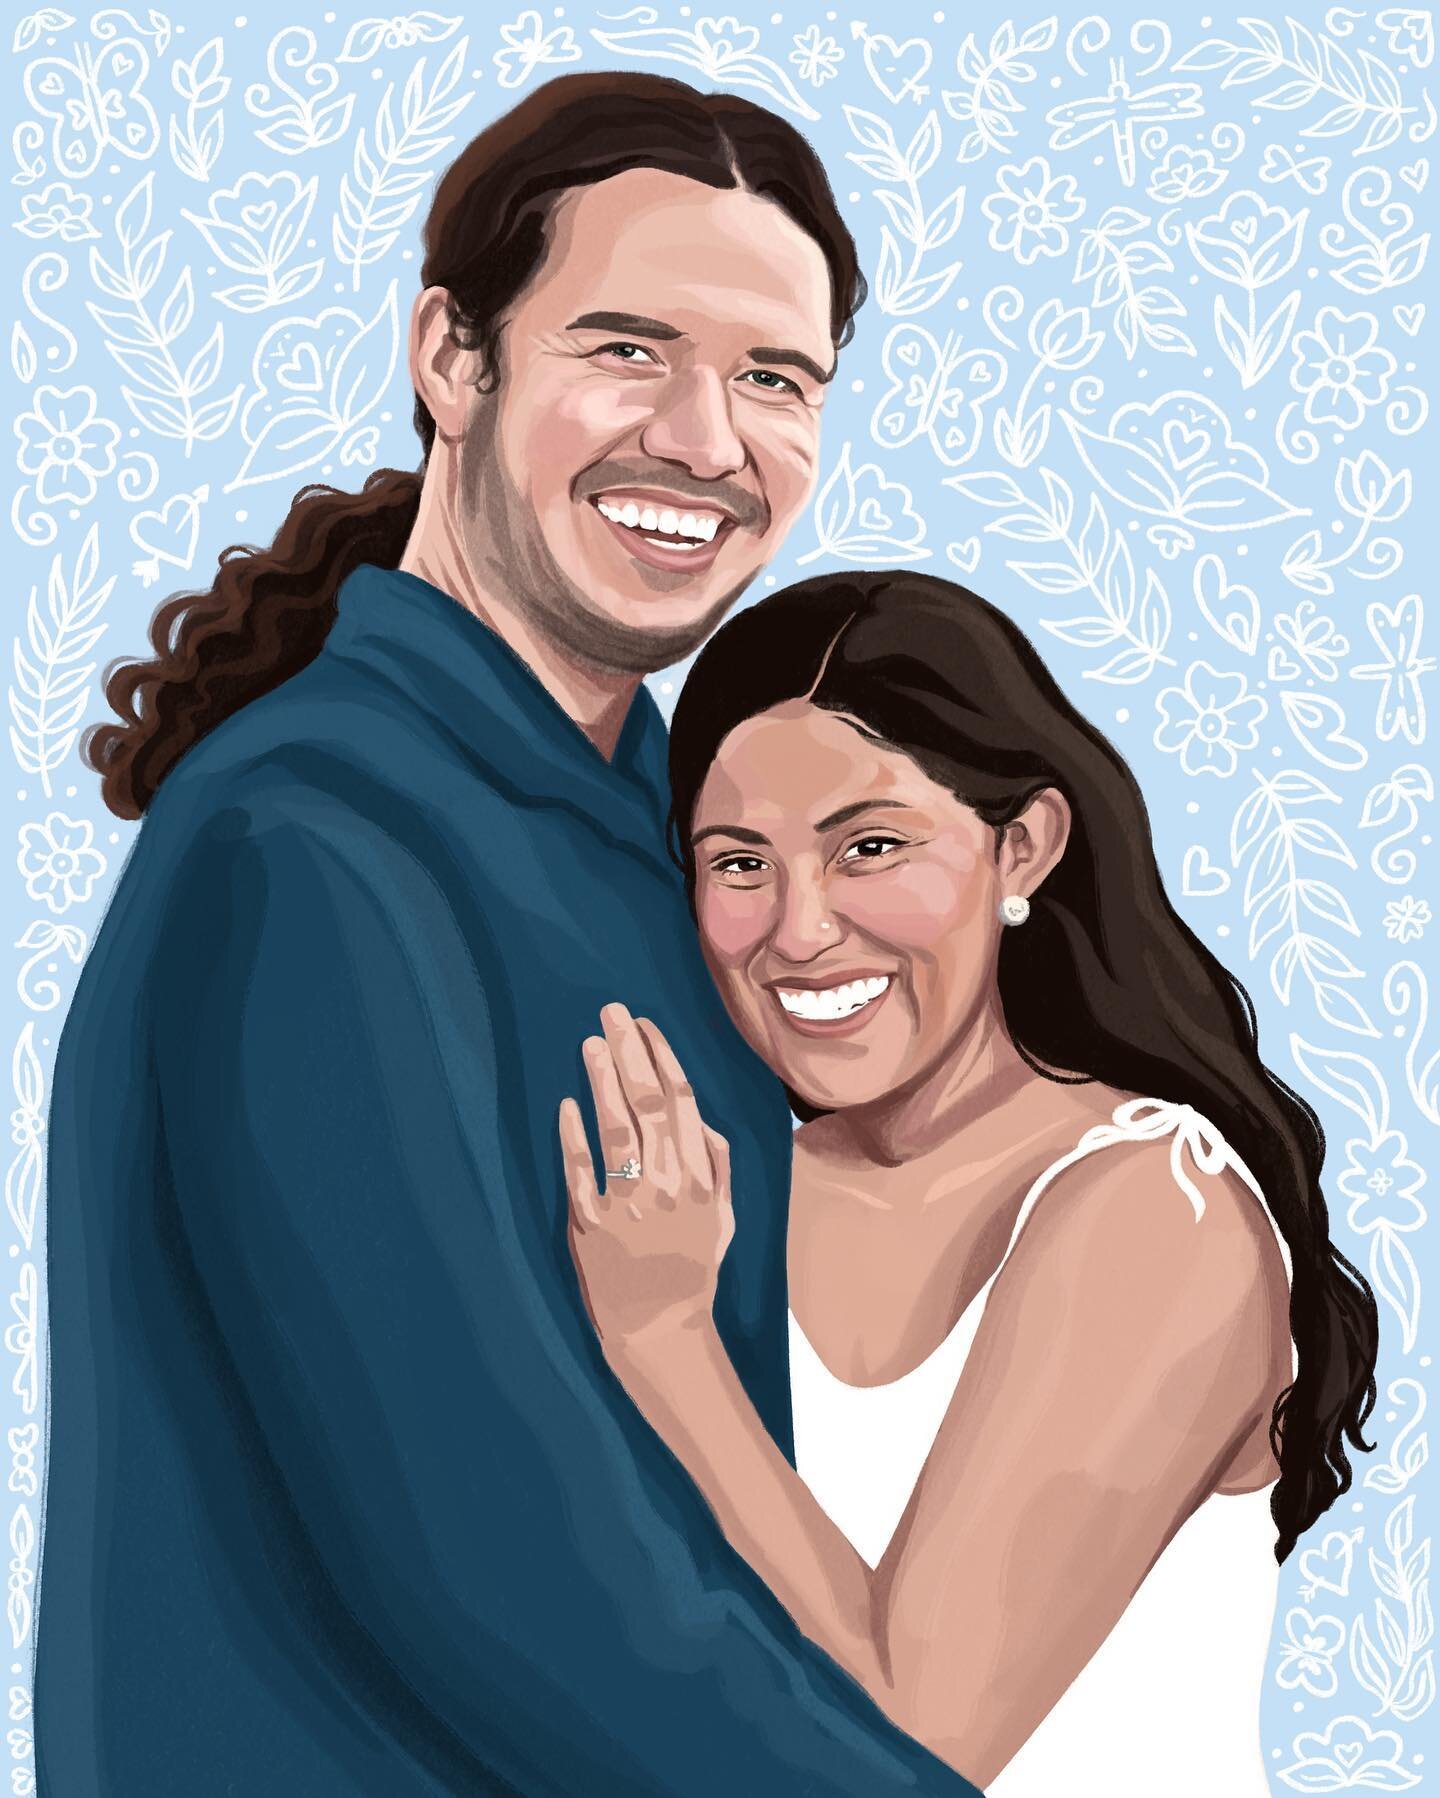 I paint people, too! 👩🏽&zwj;❤️&zwj;👨🏽 I created this piece for my lovely future siblings-in-law, Janelle and Myasha, as a wedding gift. They celebrated their big day this weekend, and I loved being able to capture a little of their love in this p